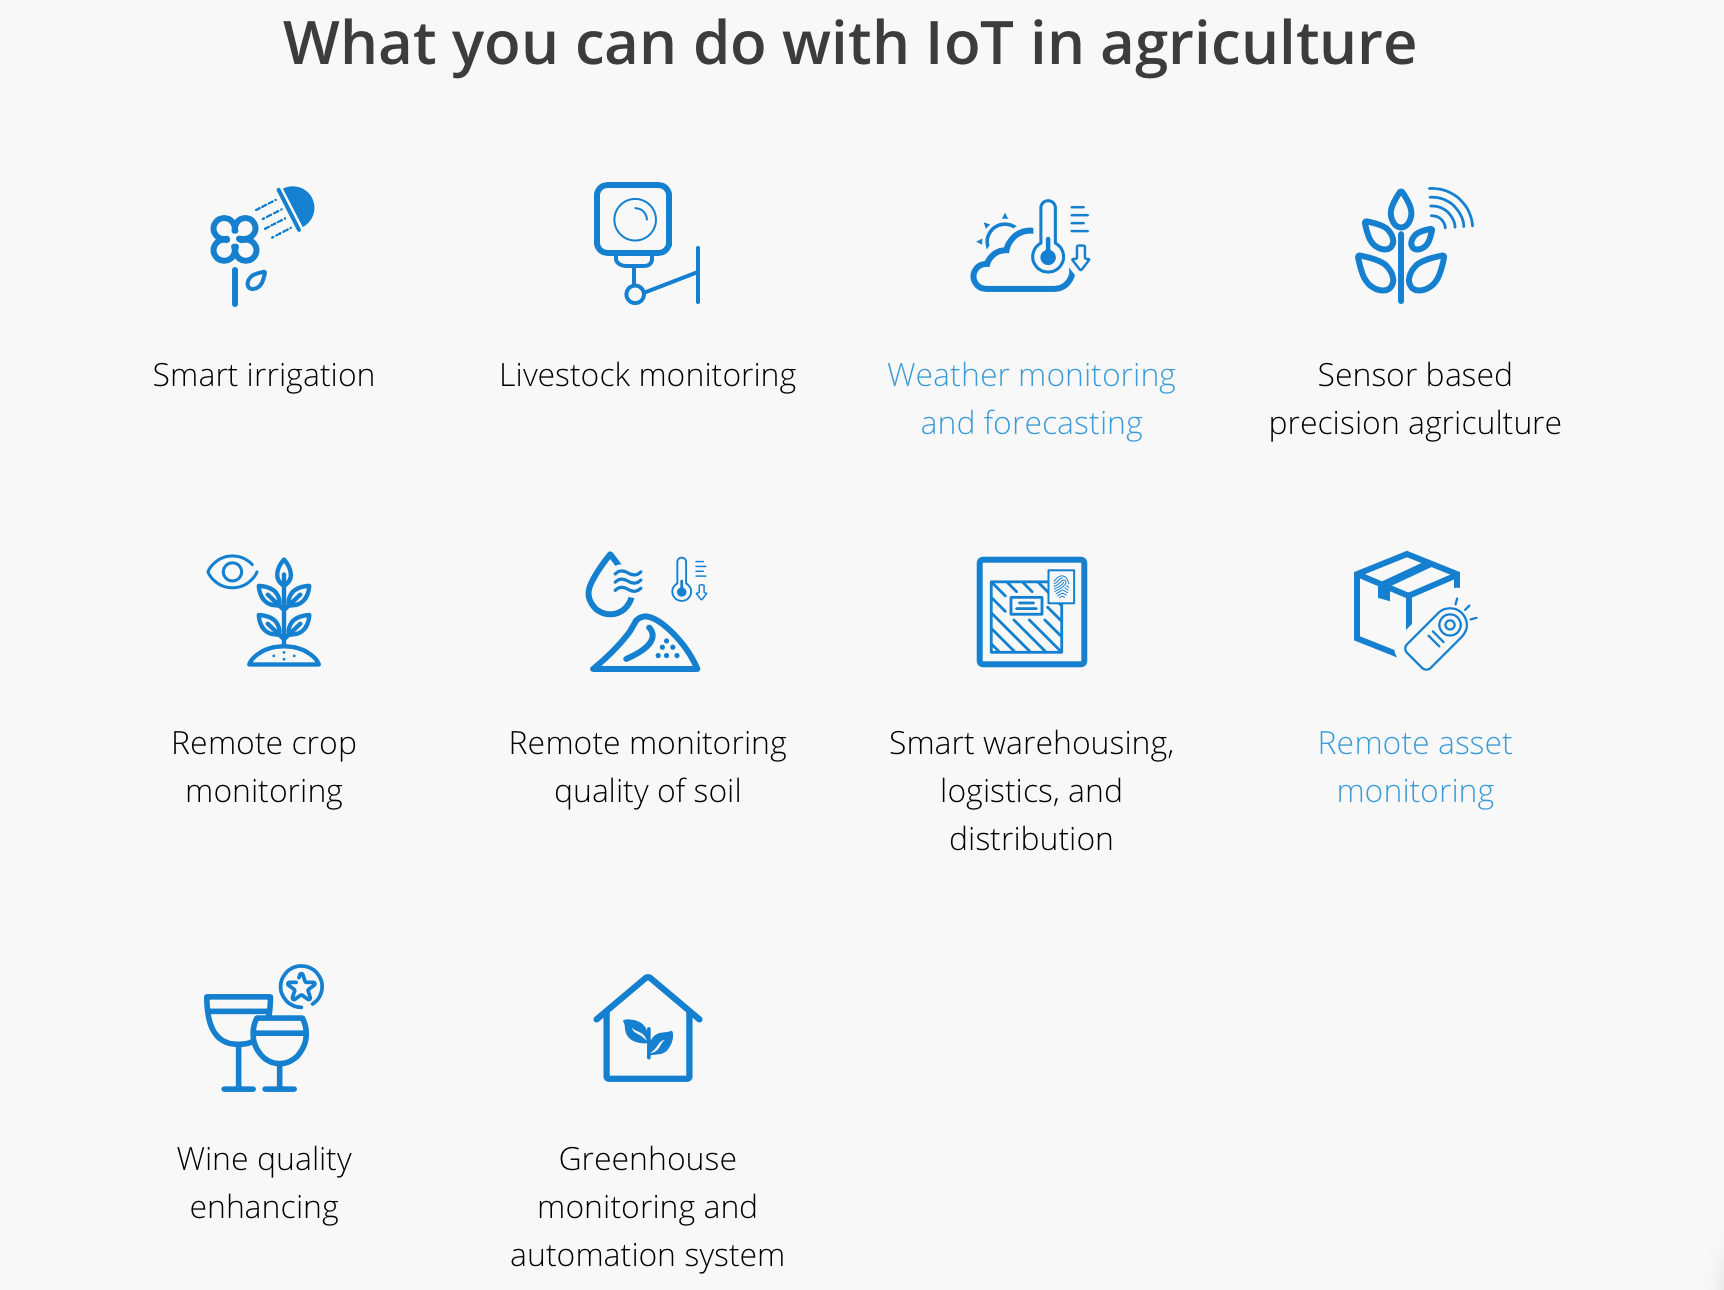 Rise of IOT in agriculture